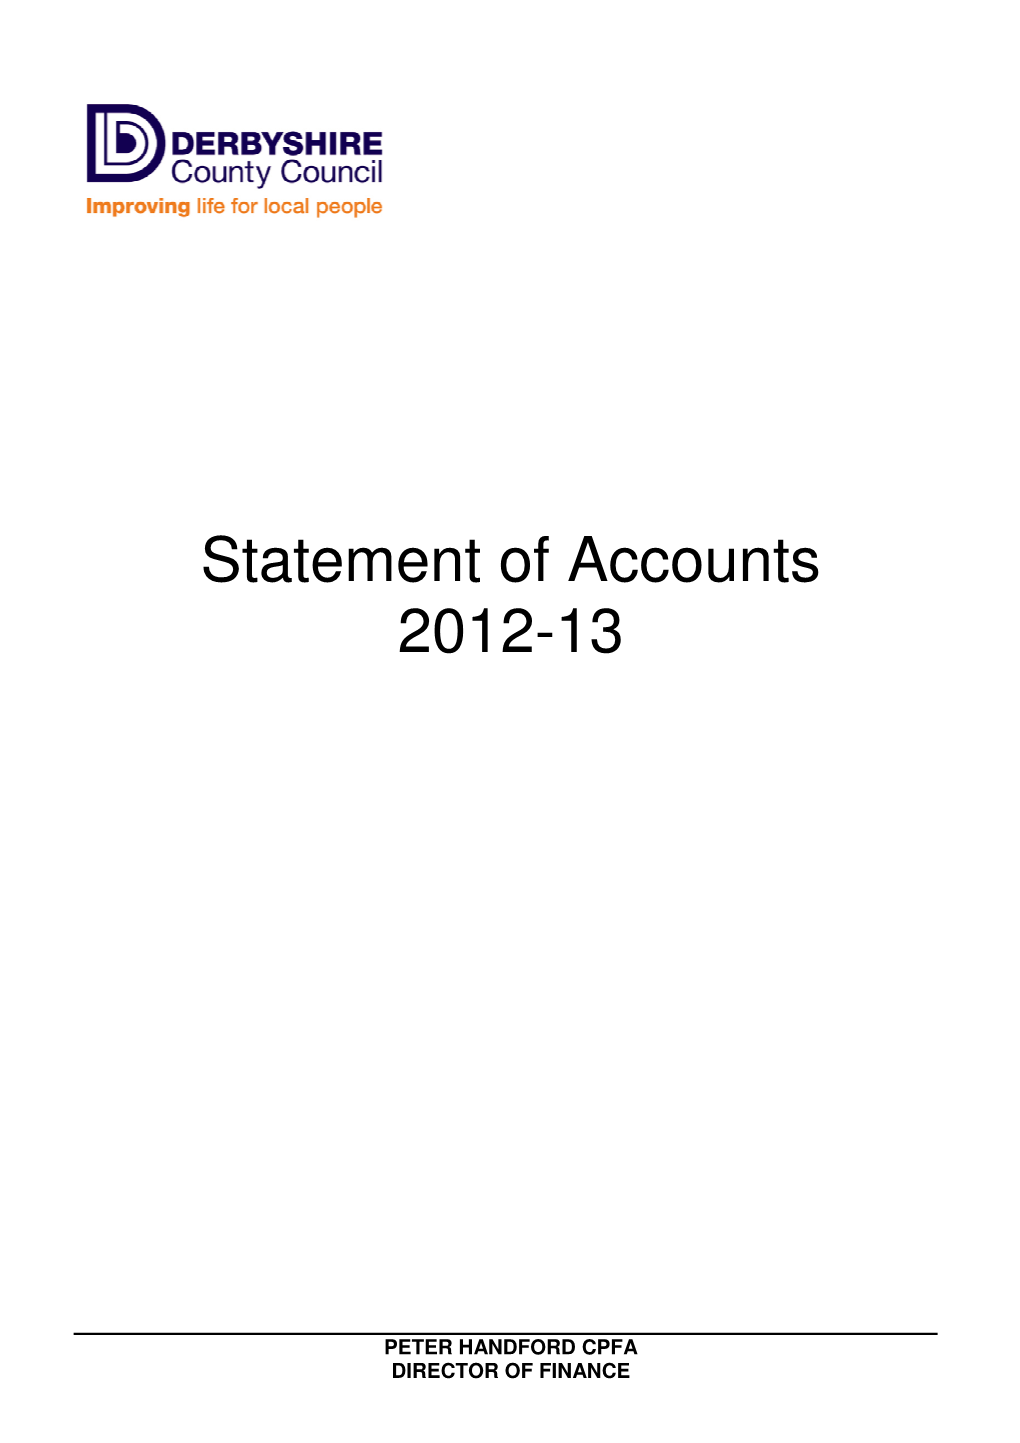 Post-Audit Final Statement of Accounts 2012-13